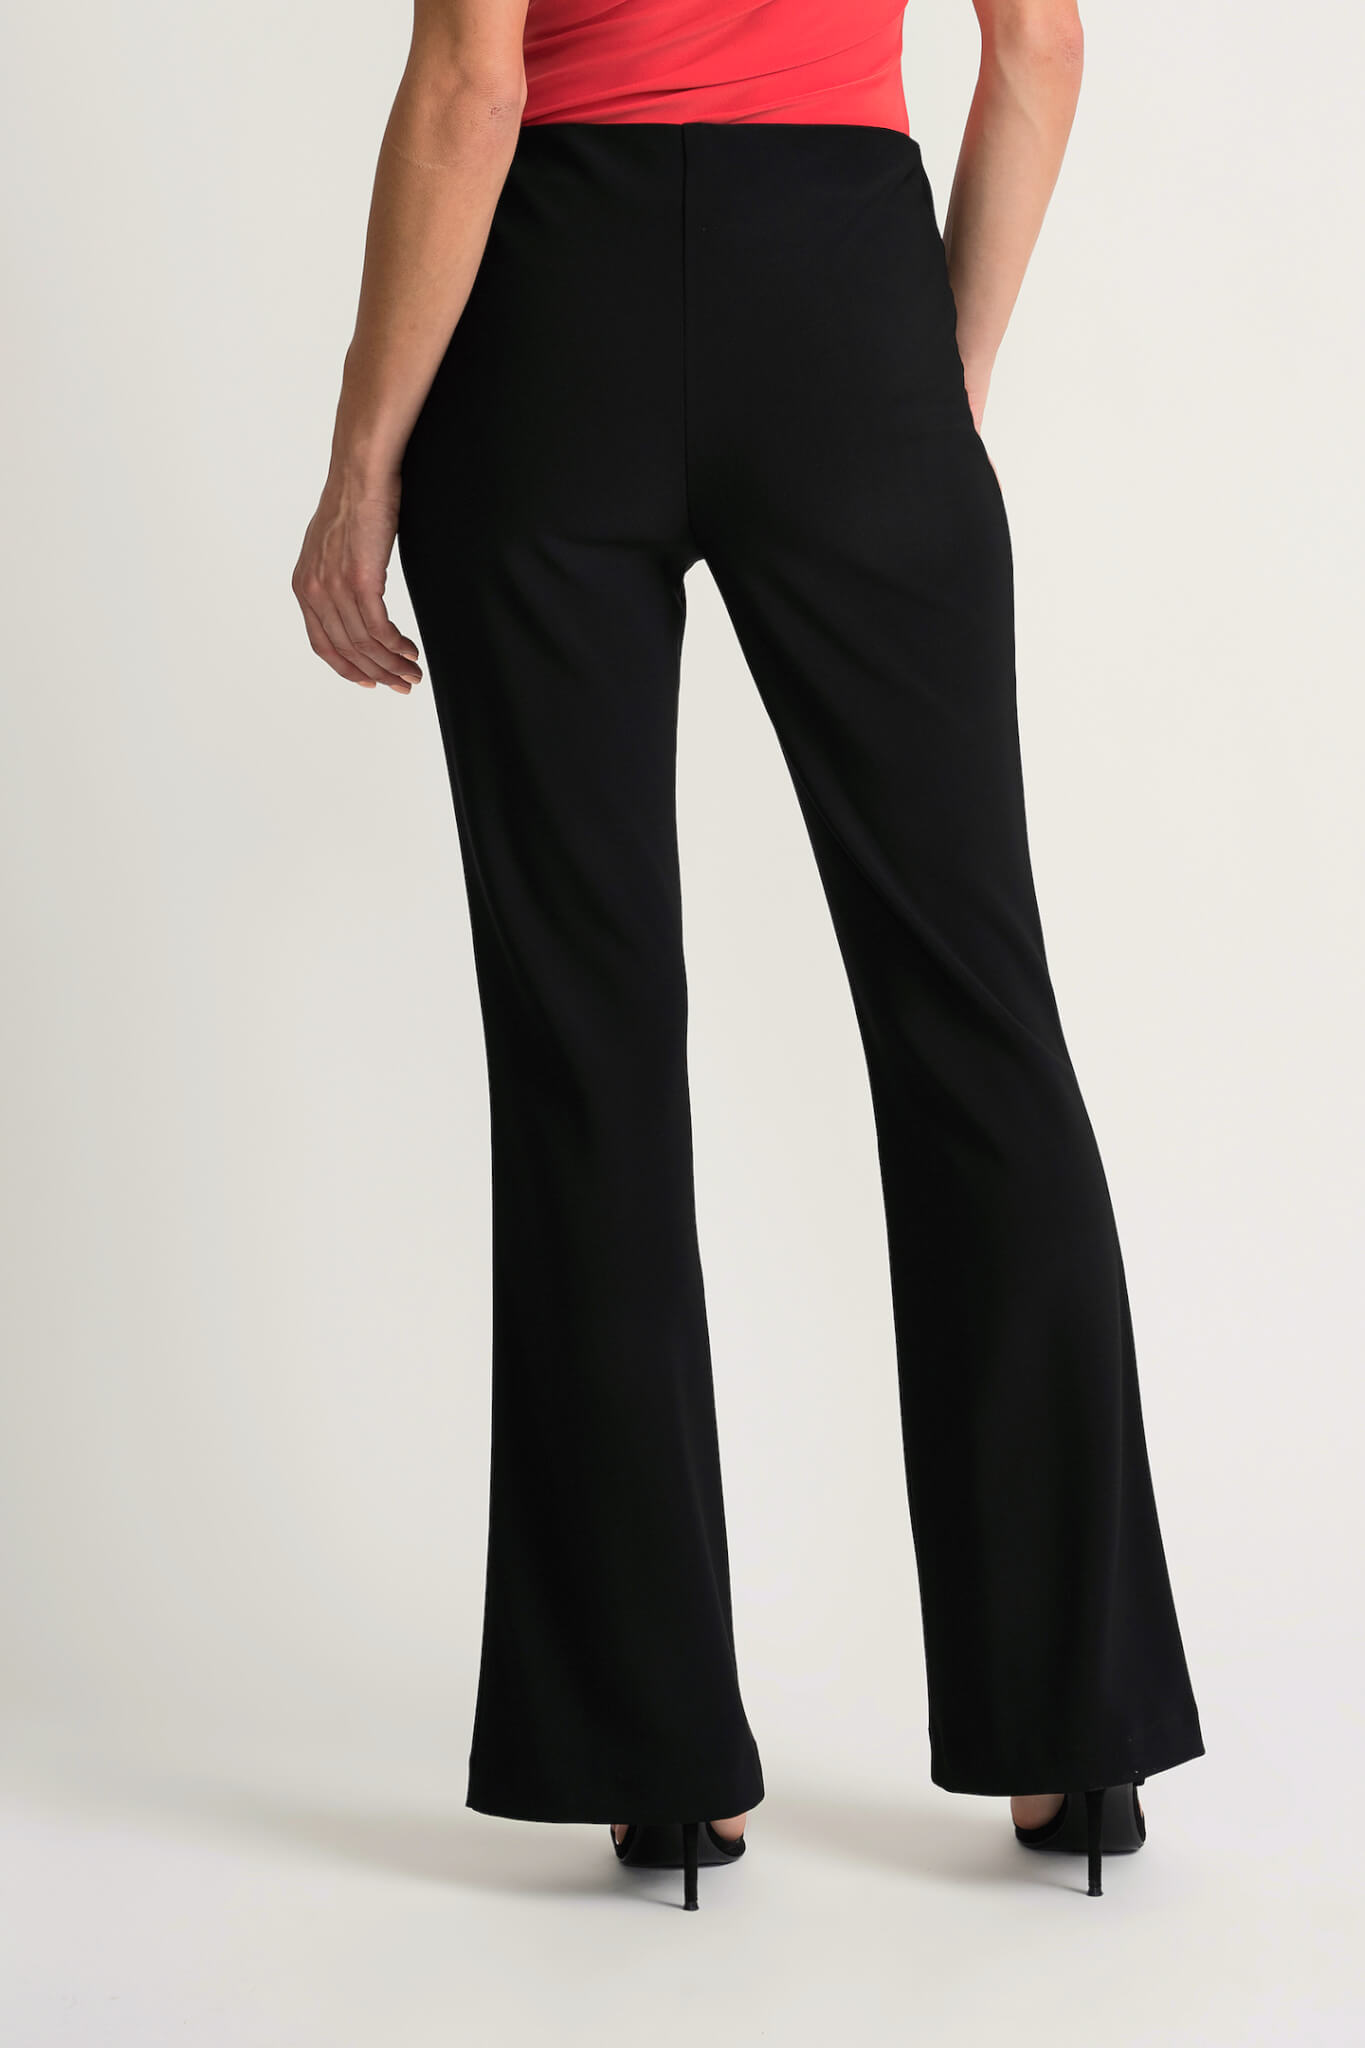 Bootcut Black Stretch Pant Everards Clothing